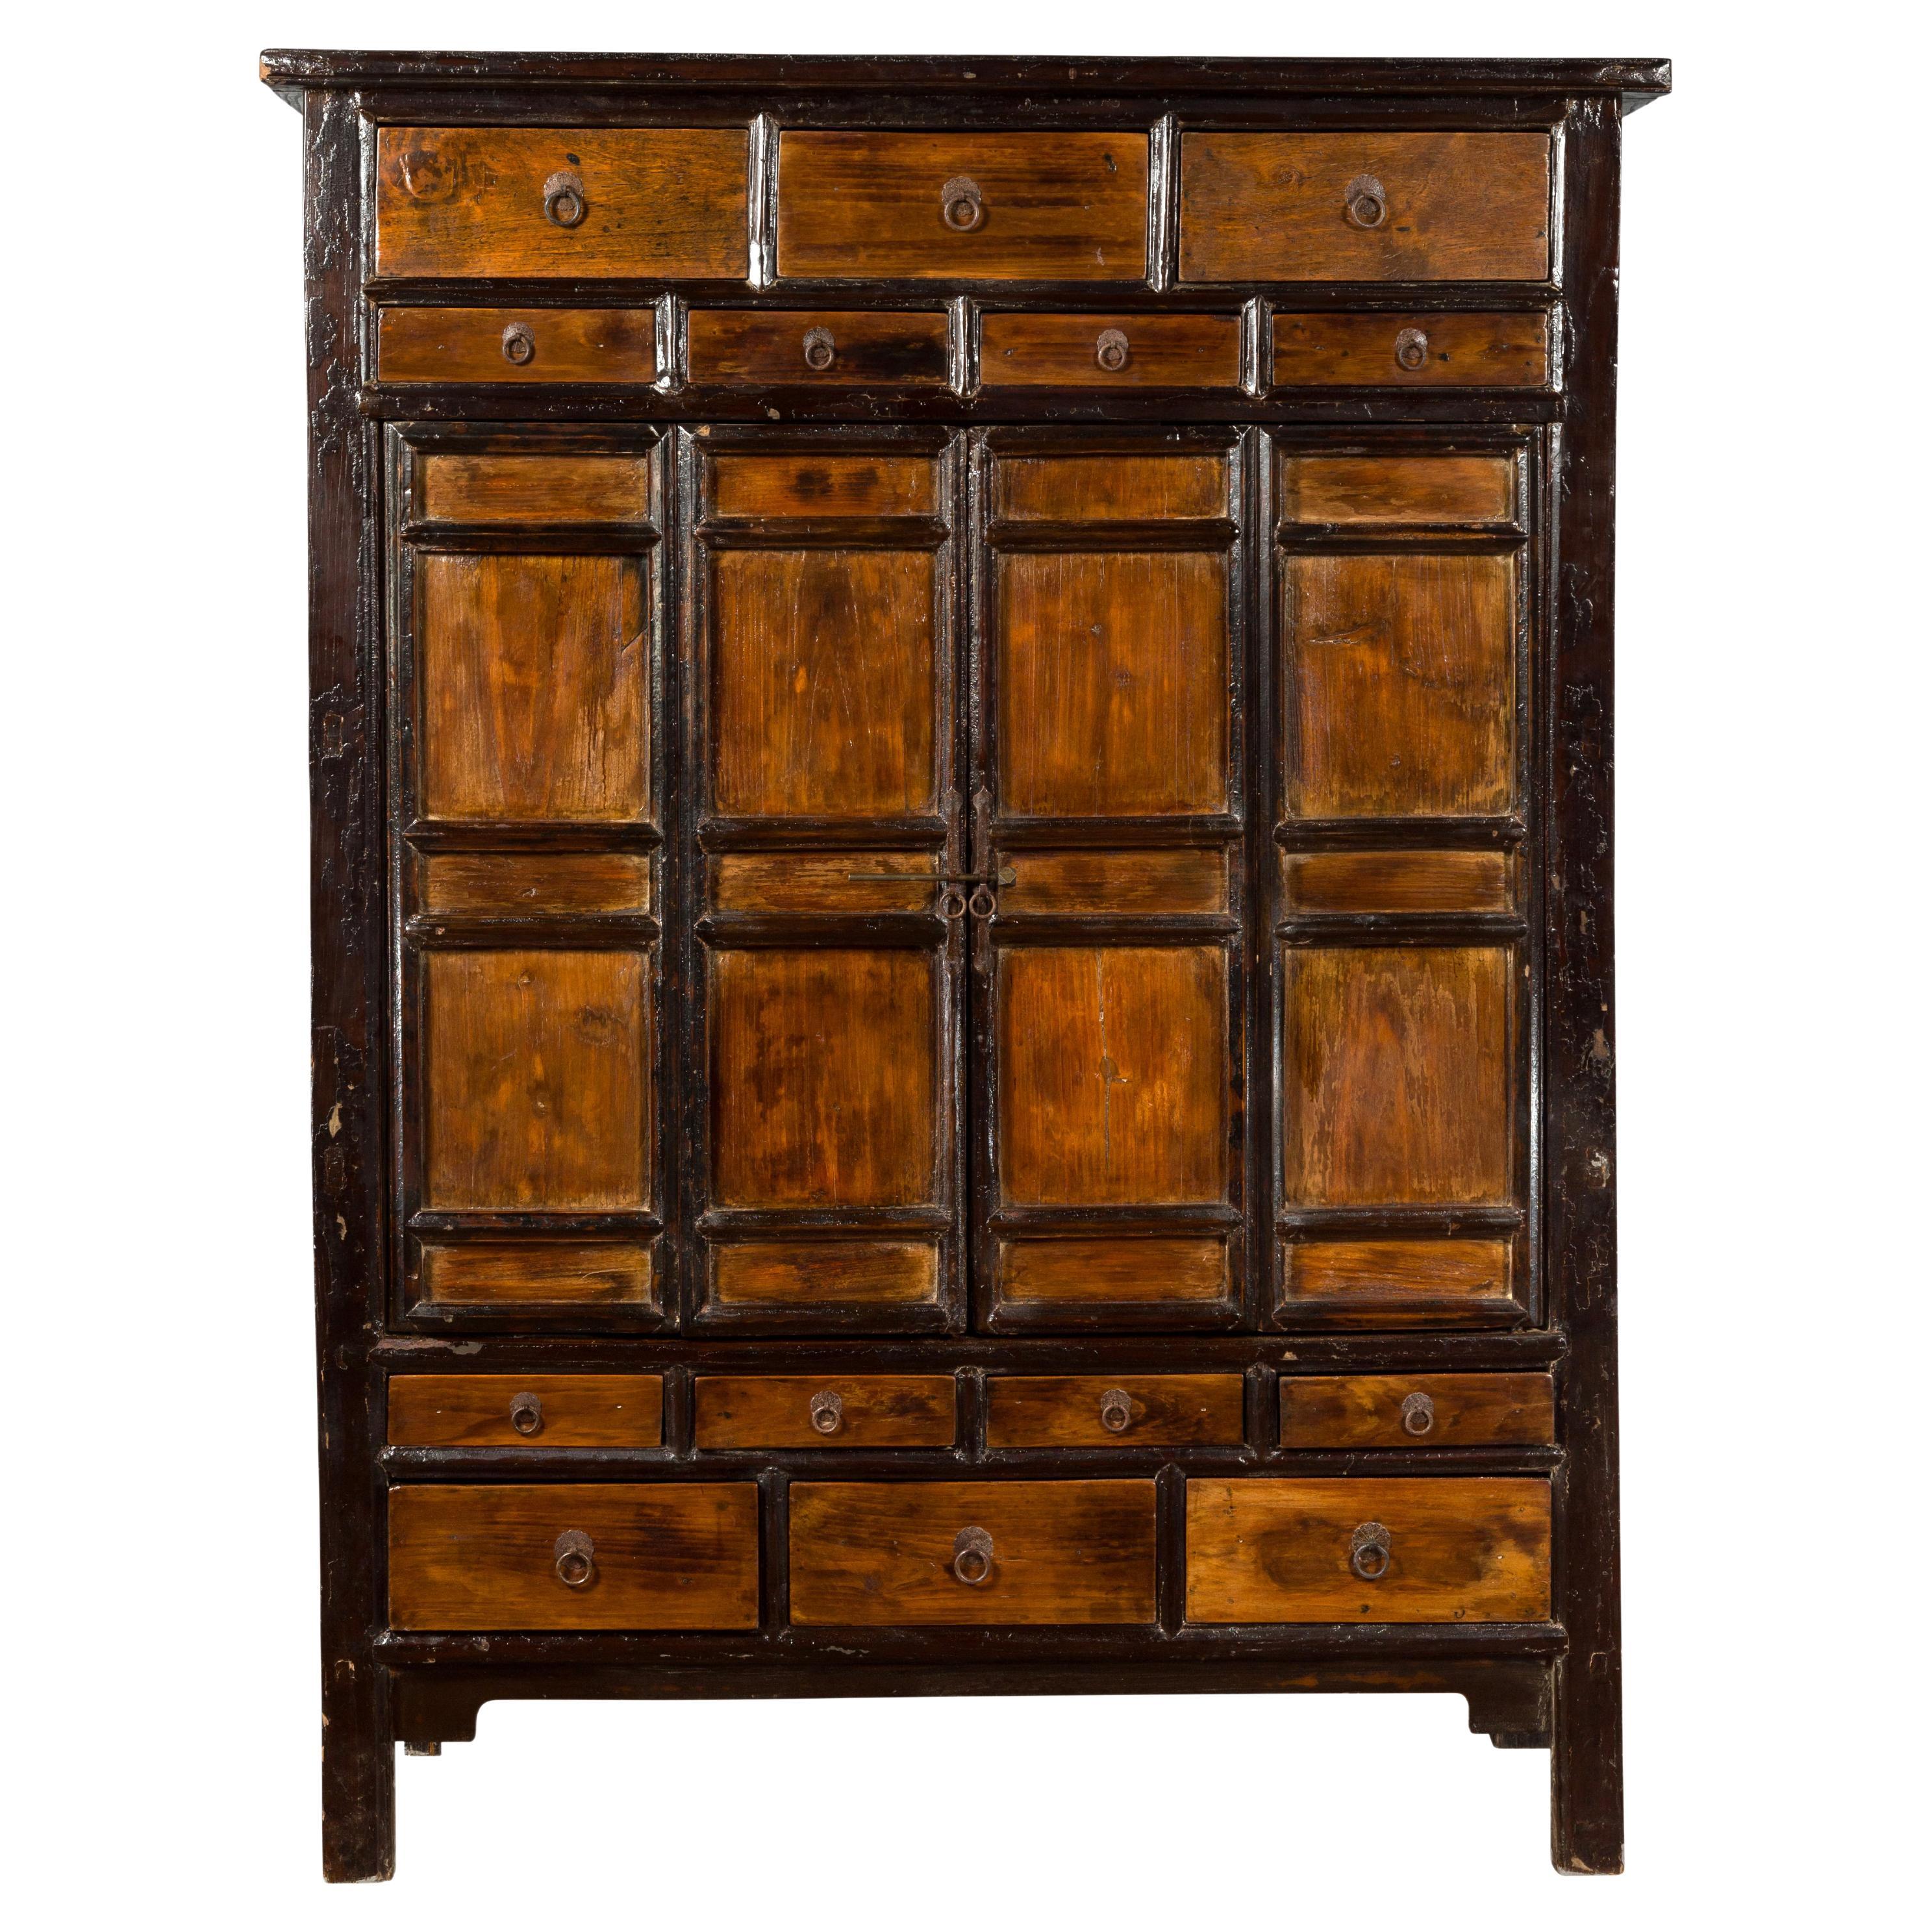 Chinese Qing Dynasty Period Armoire Cabinet with 14 Drawers and Two Doors, 1900s